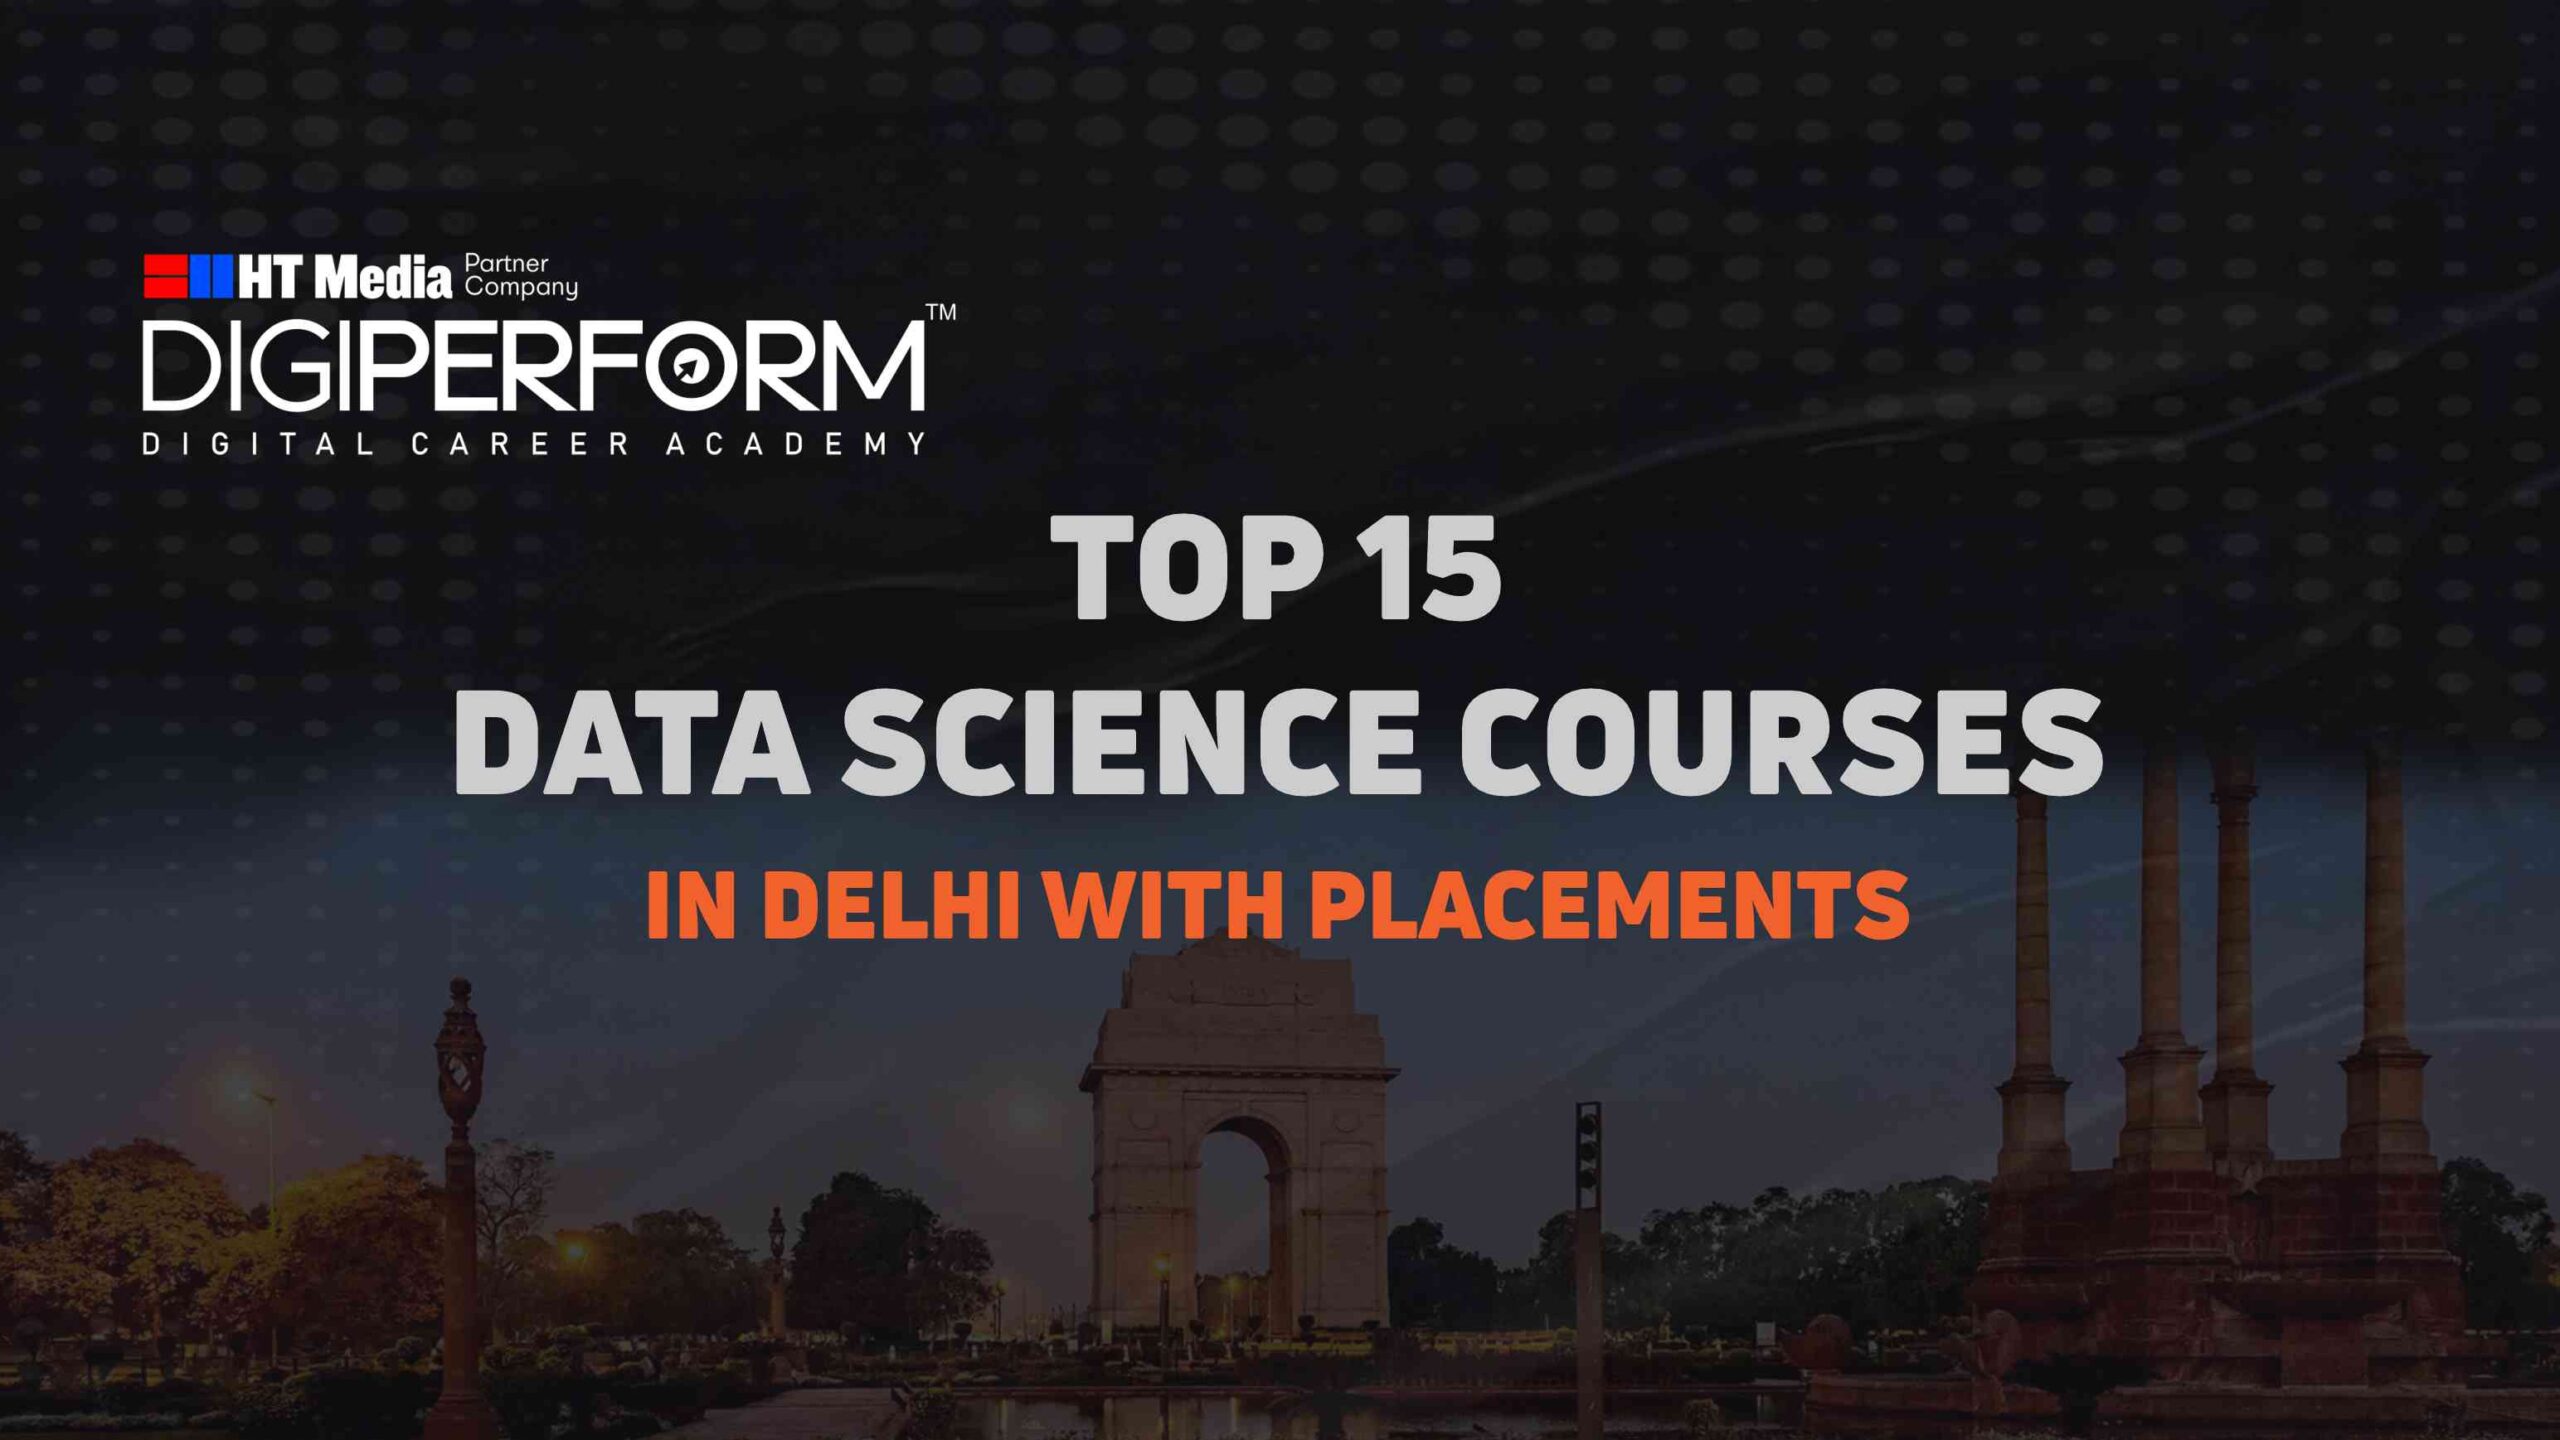 Top 15 Data Science Courses in Delhi with Placement